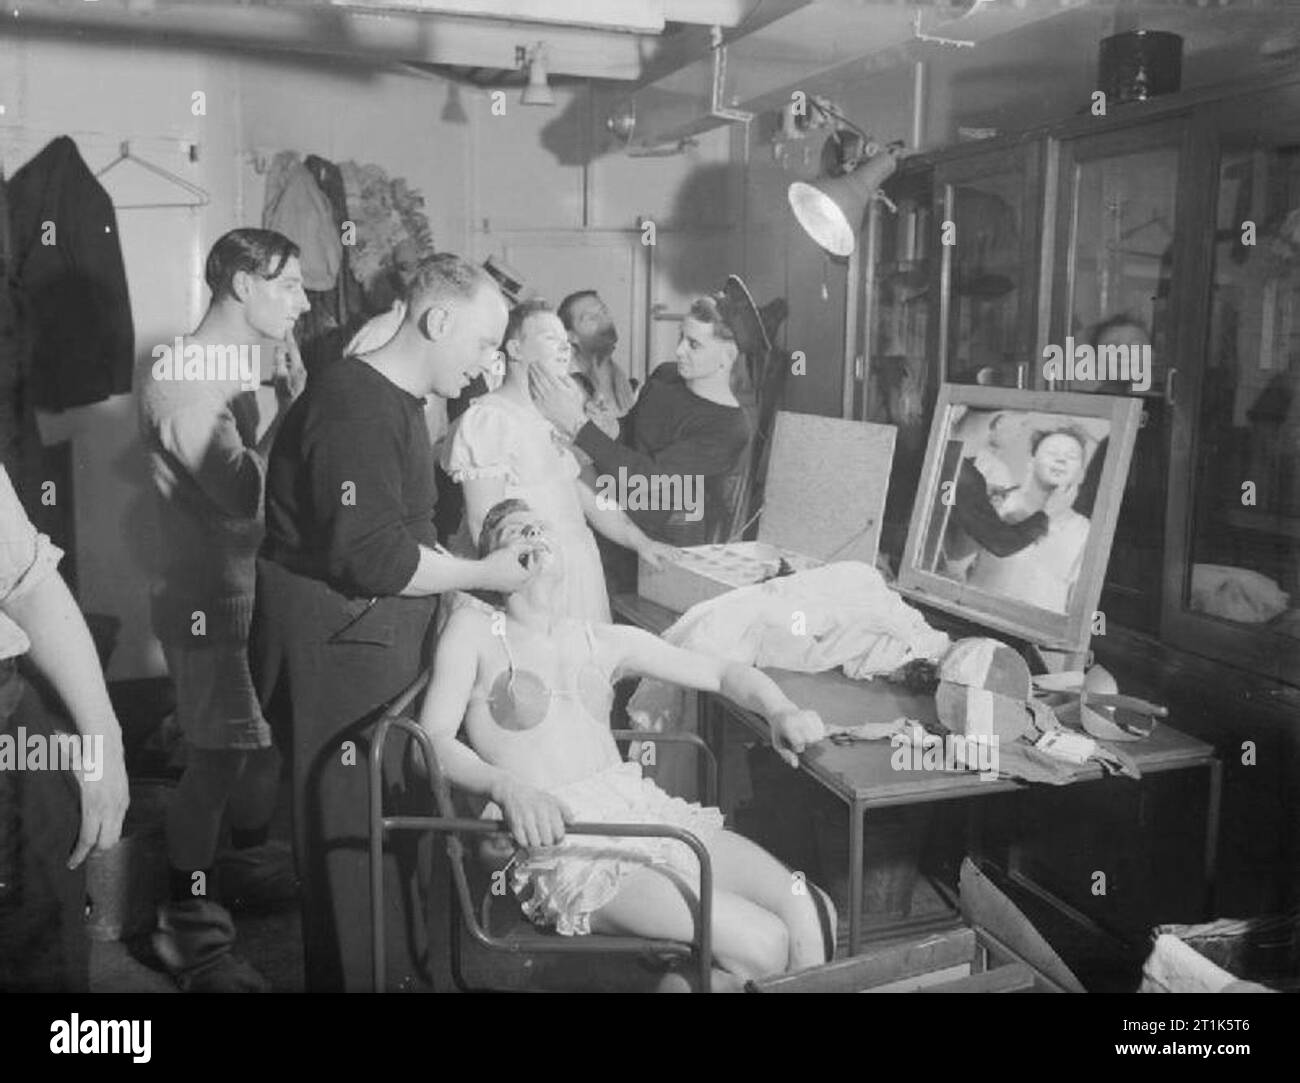 Leisure and Entertainment during the Second World War The Armed Forces: Sailors prepare a Christmas concert on board HMS TYNE at Scapa Flow. The absence of women on board usually required some performers to dress up as women. The picture shows the cast's female impersonators donning costumes and applying make up. Nearest the camera, Leading Stoker R C Wright making up Stoker A J Barnes, while in the background, Stoker F Dickinson being made up by Stoker A Hills. Stock Photo